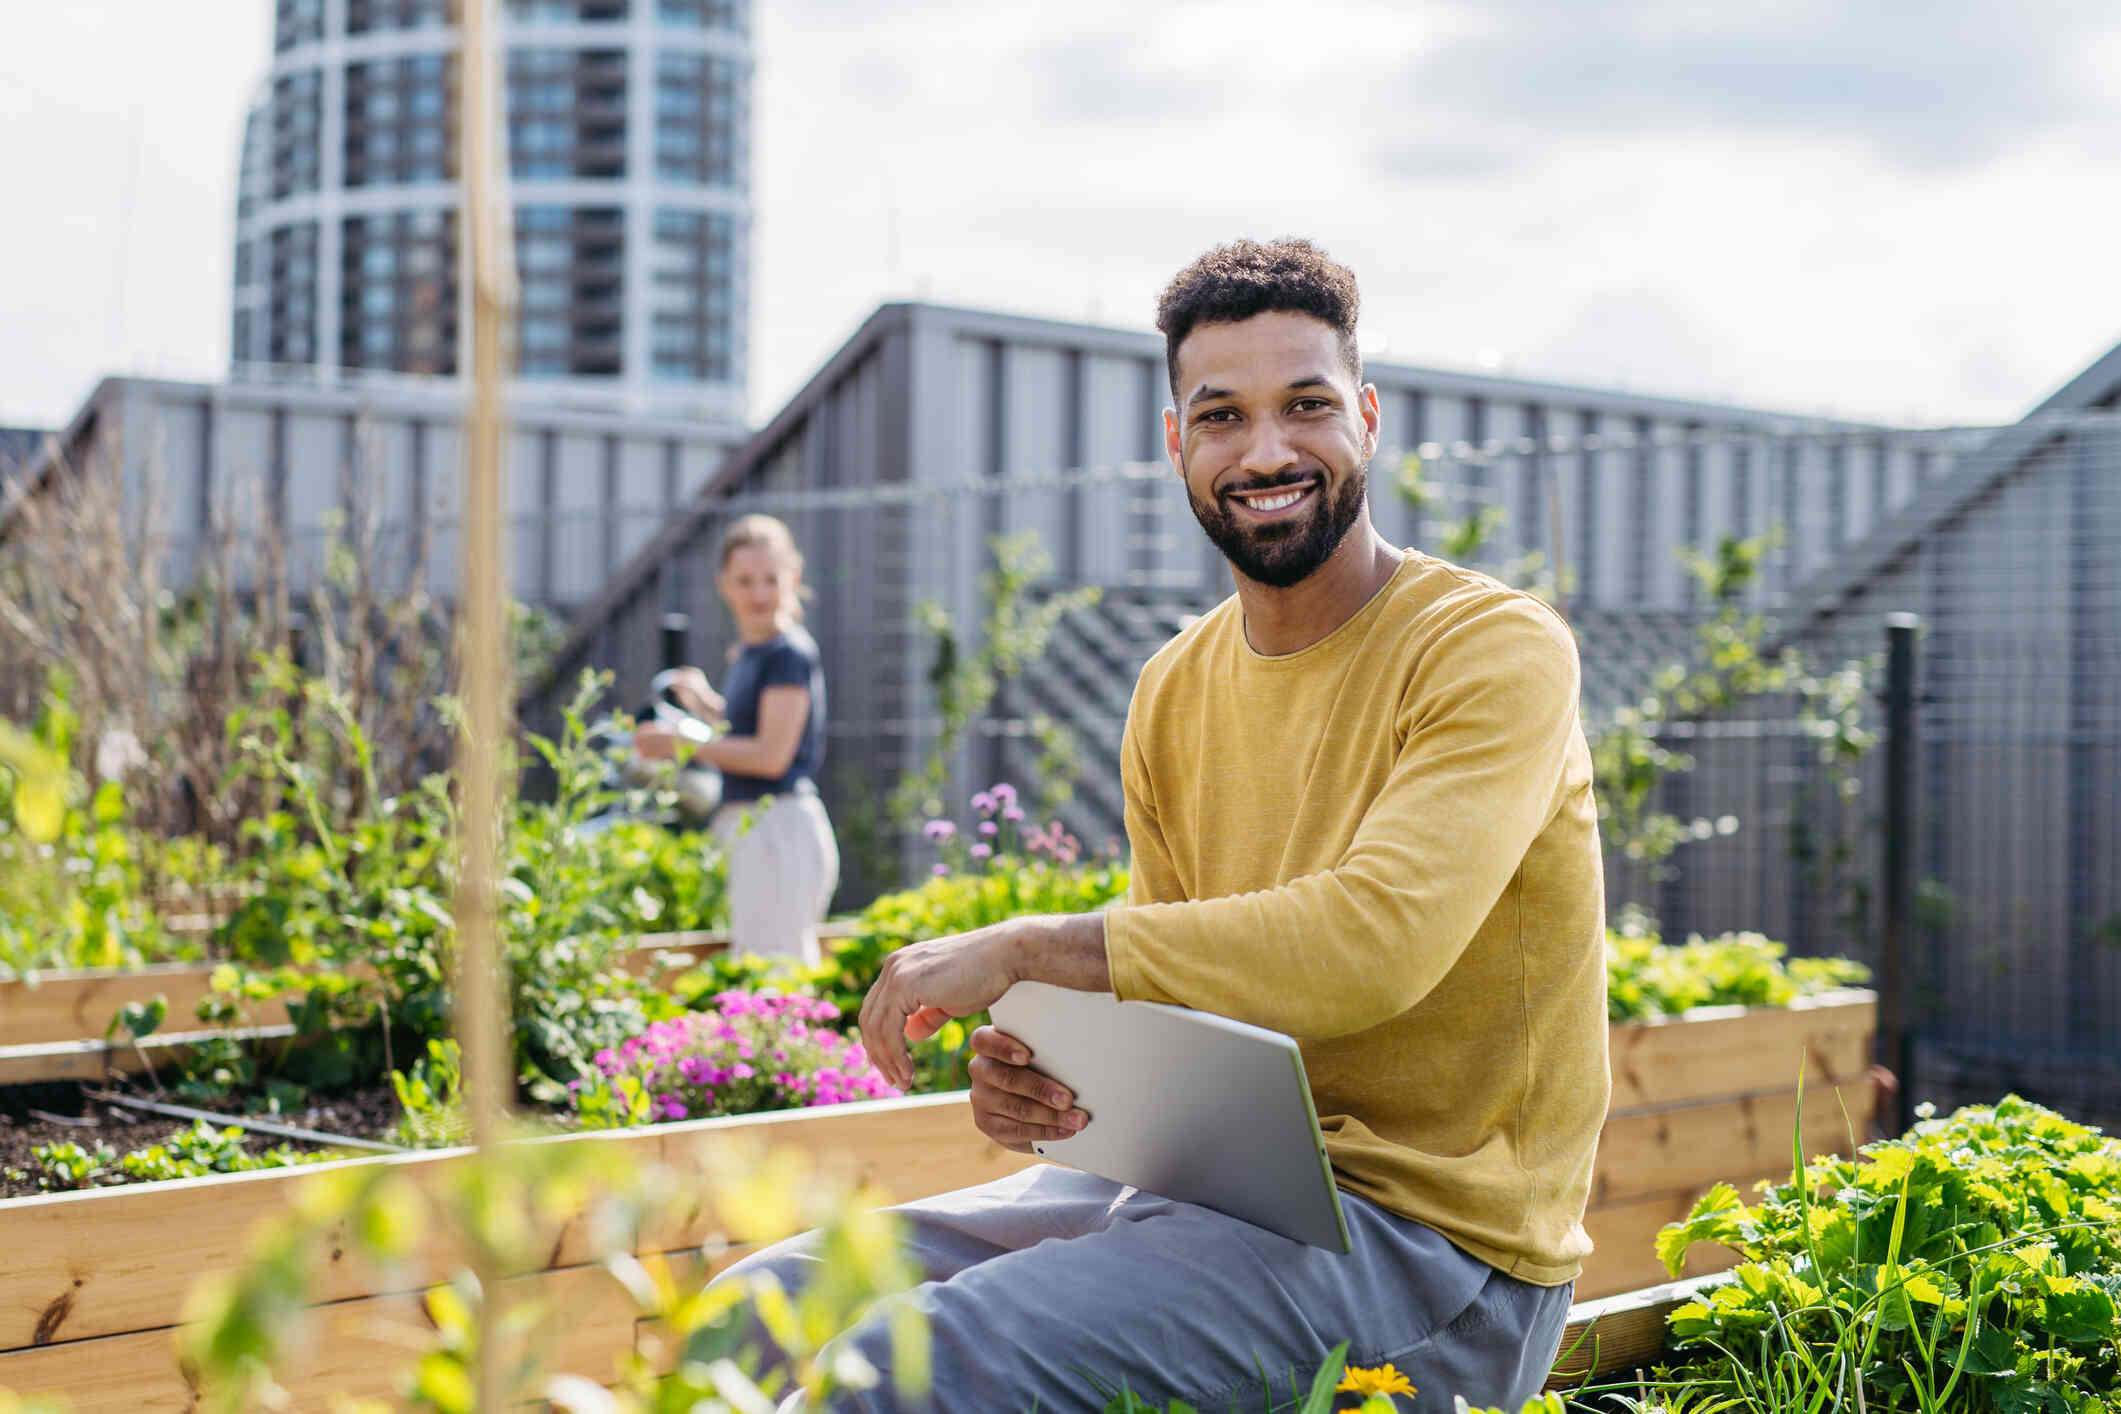 A man in a yellow shirt sits outside with his laptop on a rooftop surrounded by a garden as he smiles at the camera.